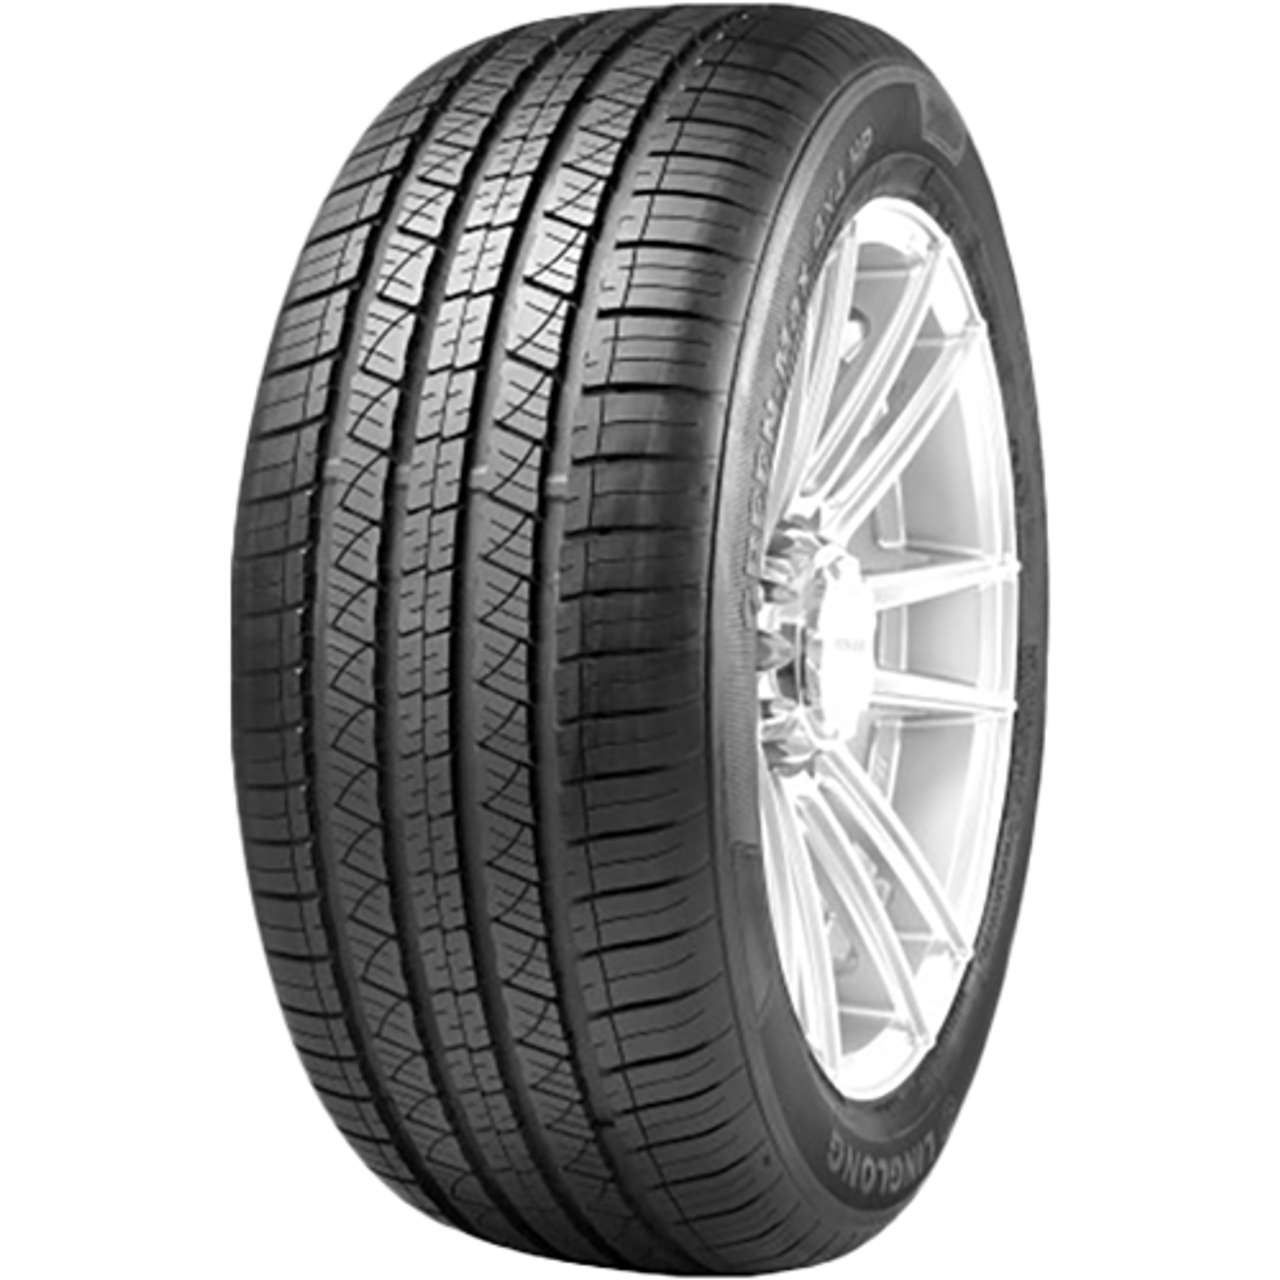 LINGLONG GREEN-MAX 4X4 HP 235/60R17 106V BSW